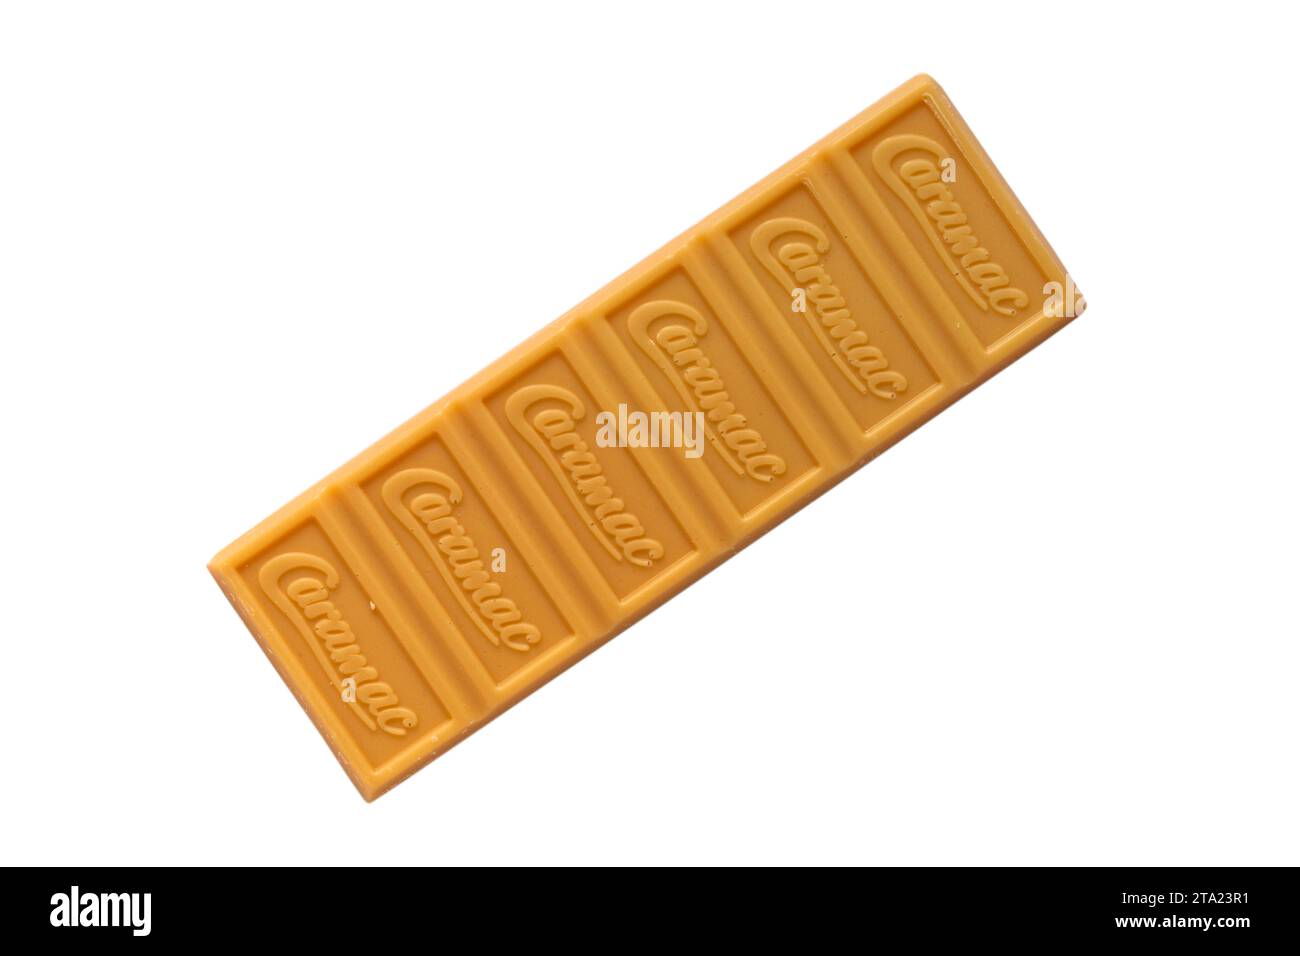 bar of Nestle Caramac chocolate unwrapped to show contents isolated on white background - looking down on from above - The Caramel Flavour bar Stock Photo